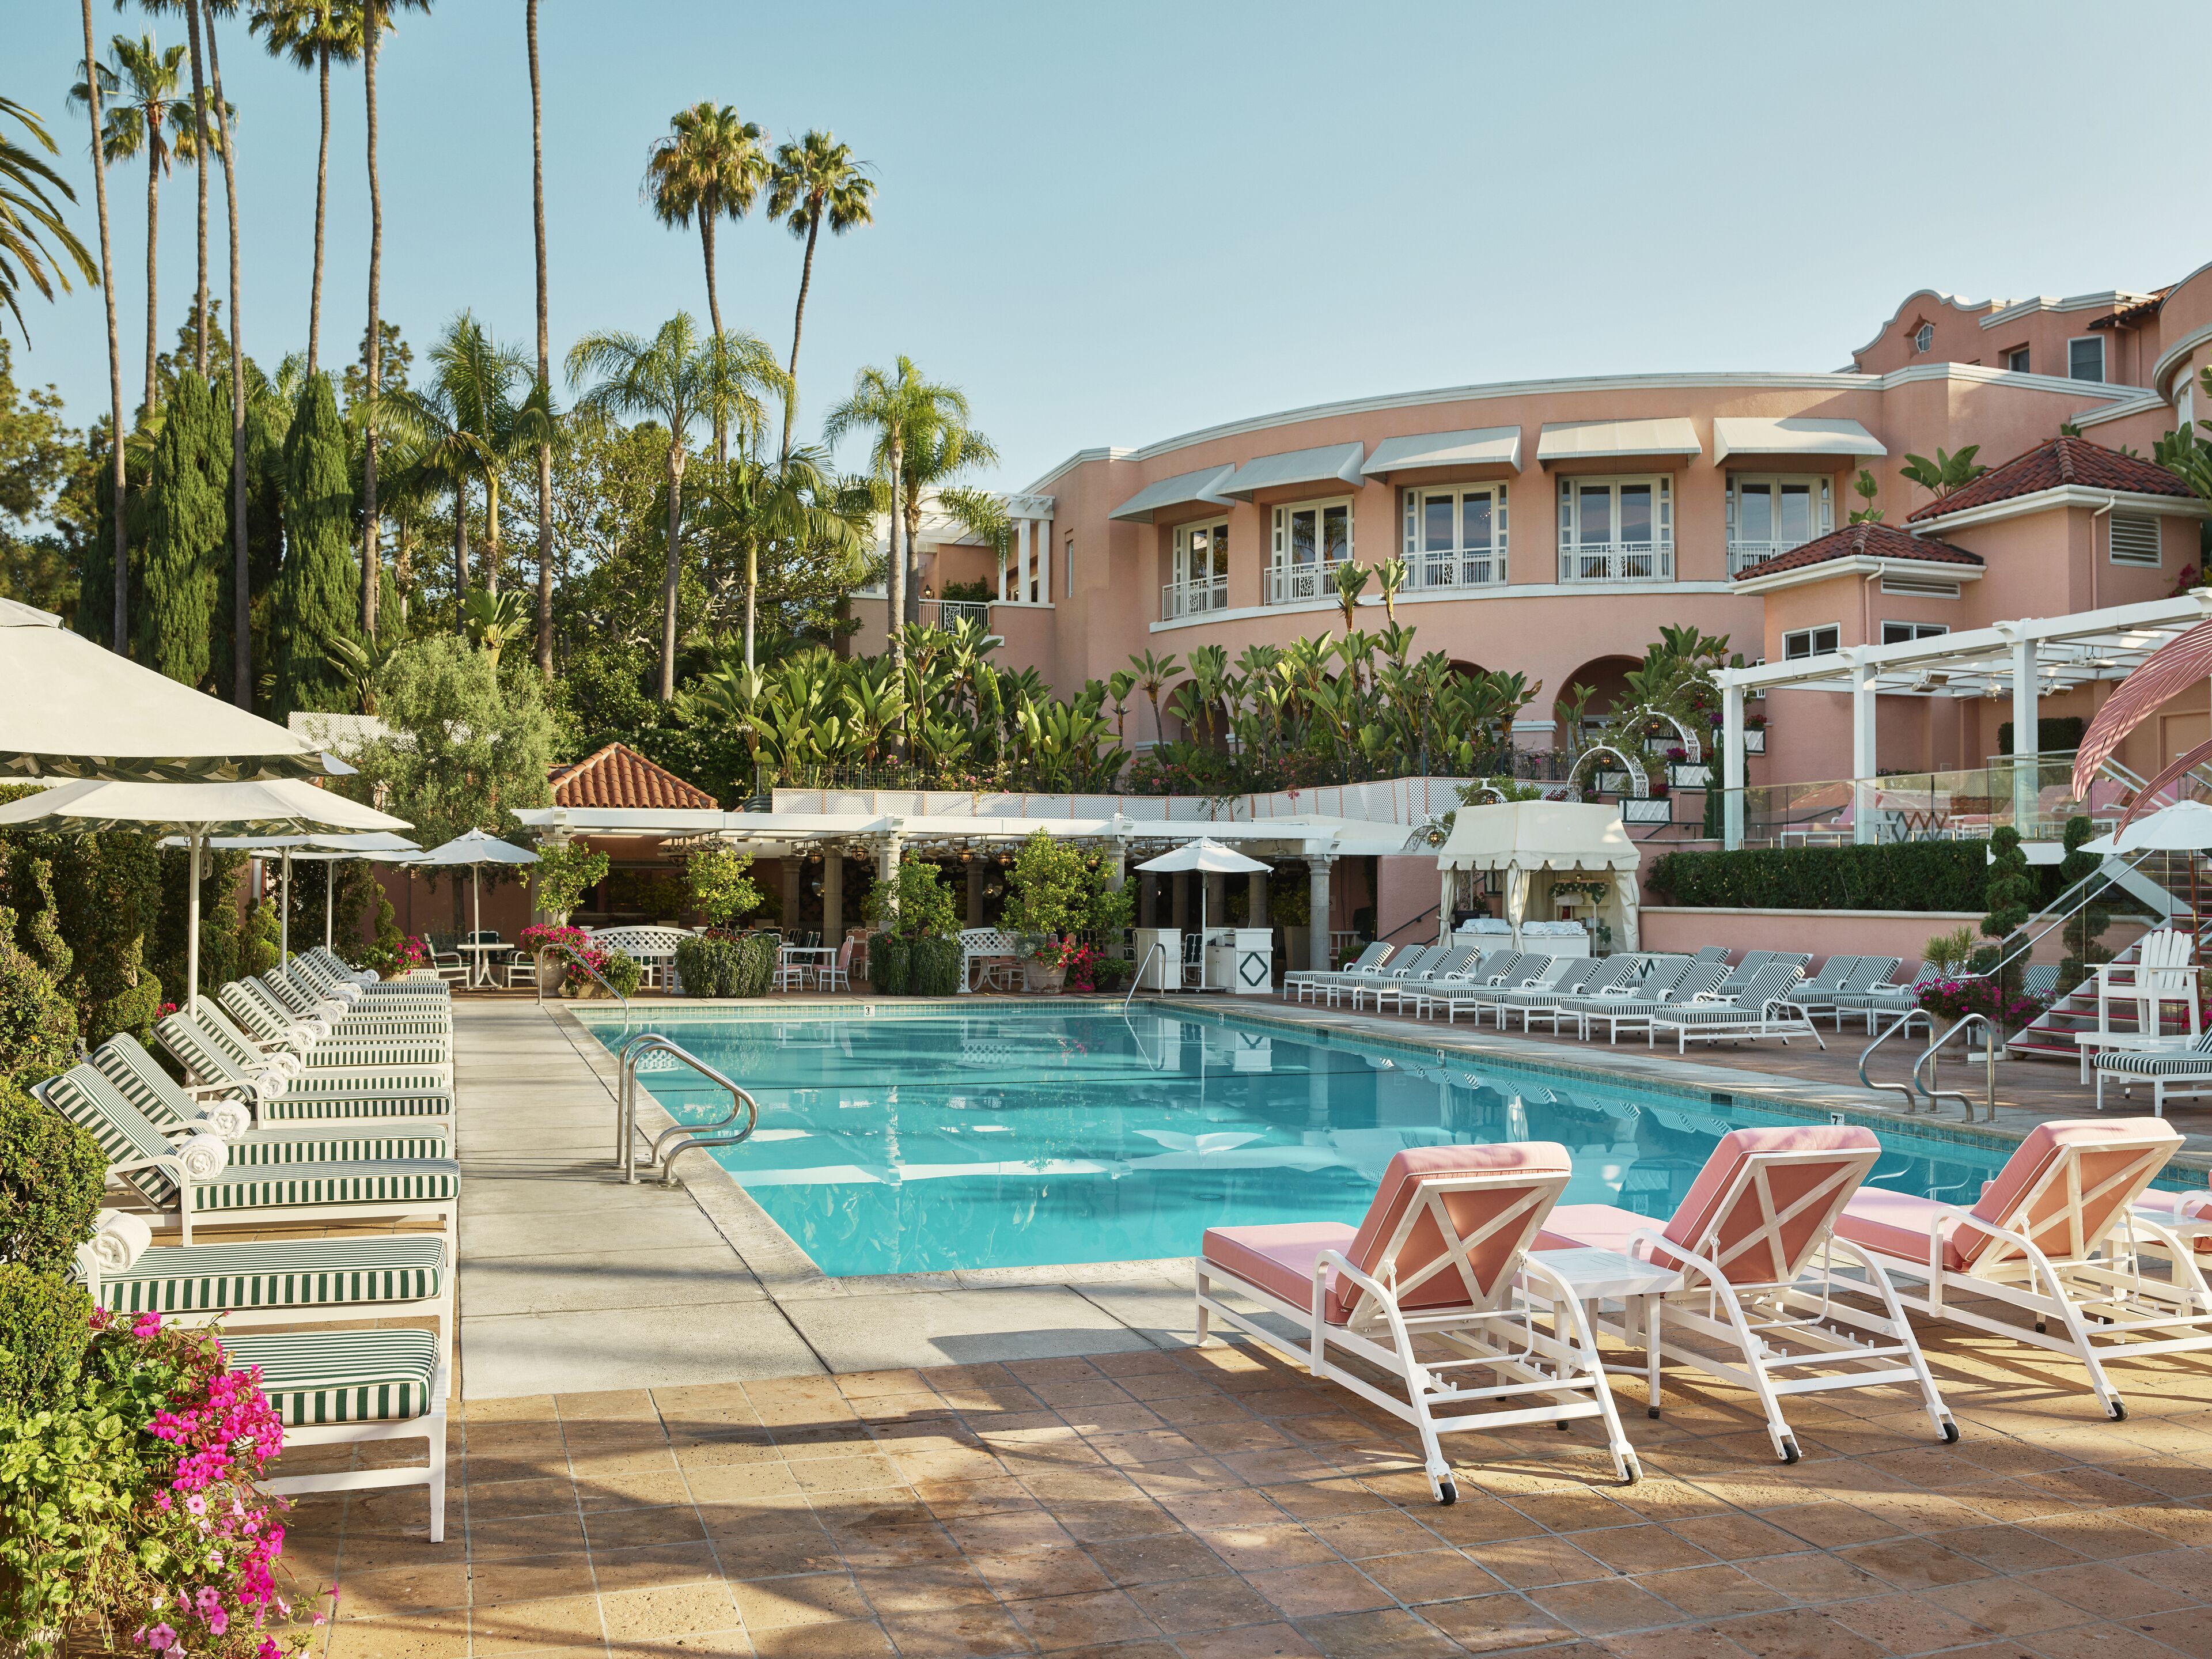 Pool view of The Beverly Hills Hotel